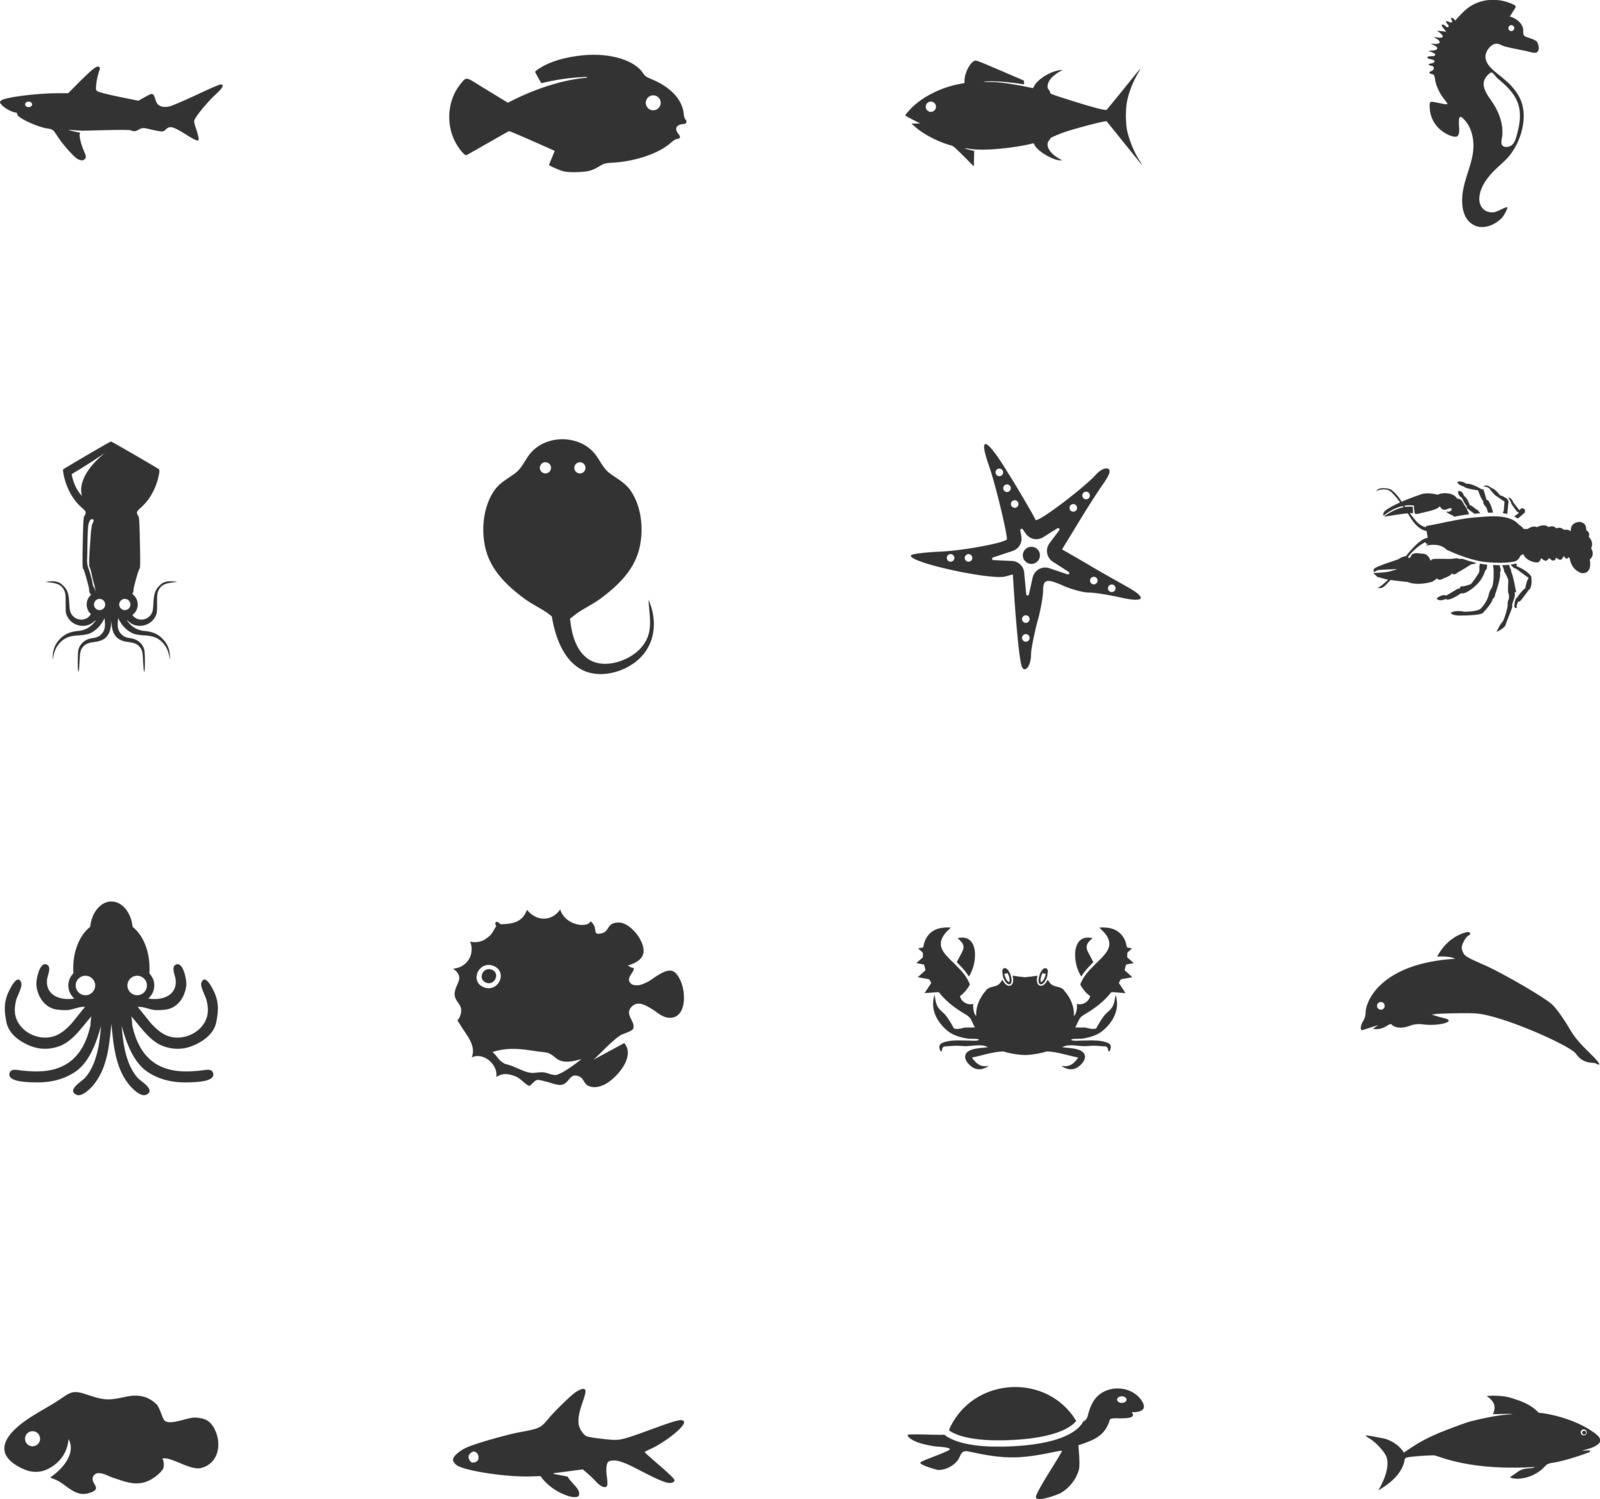 Fish marine animals vector icons for user interface design